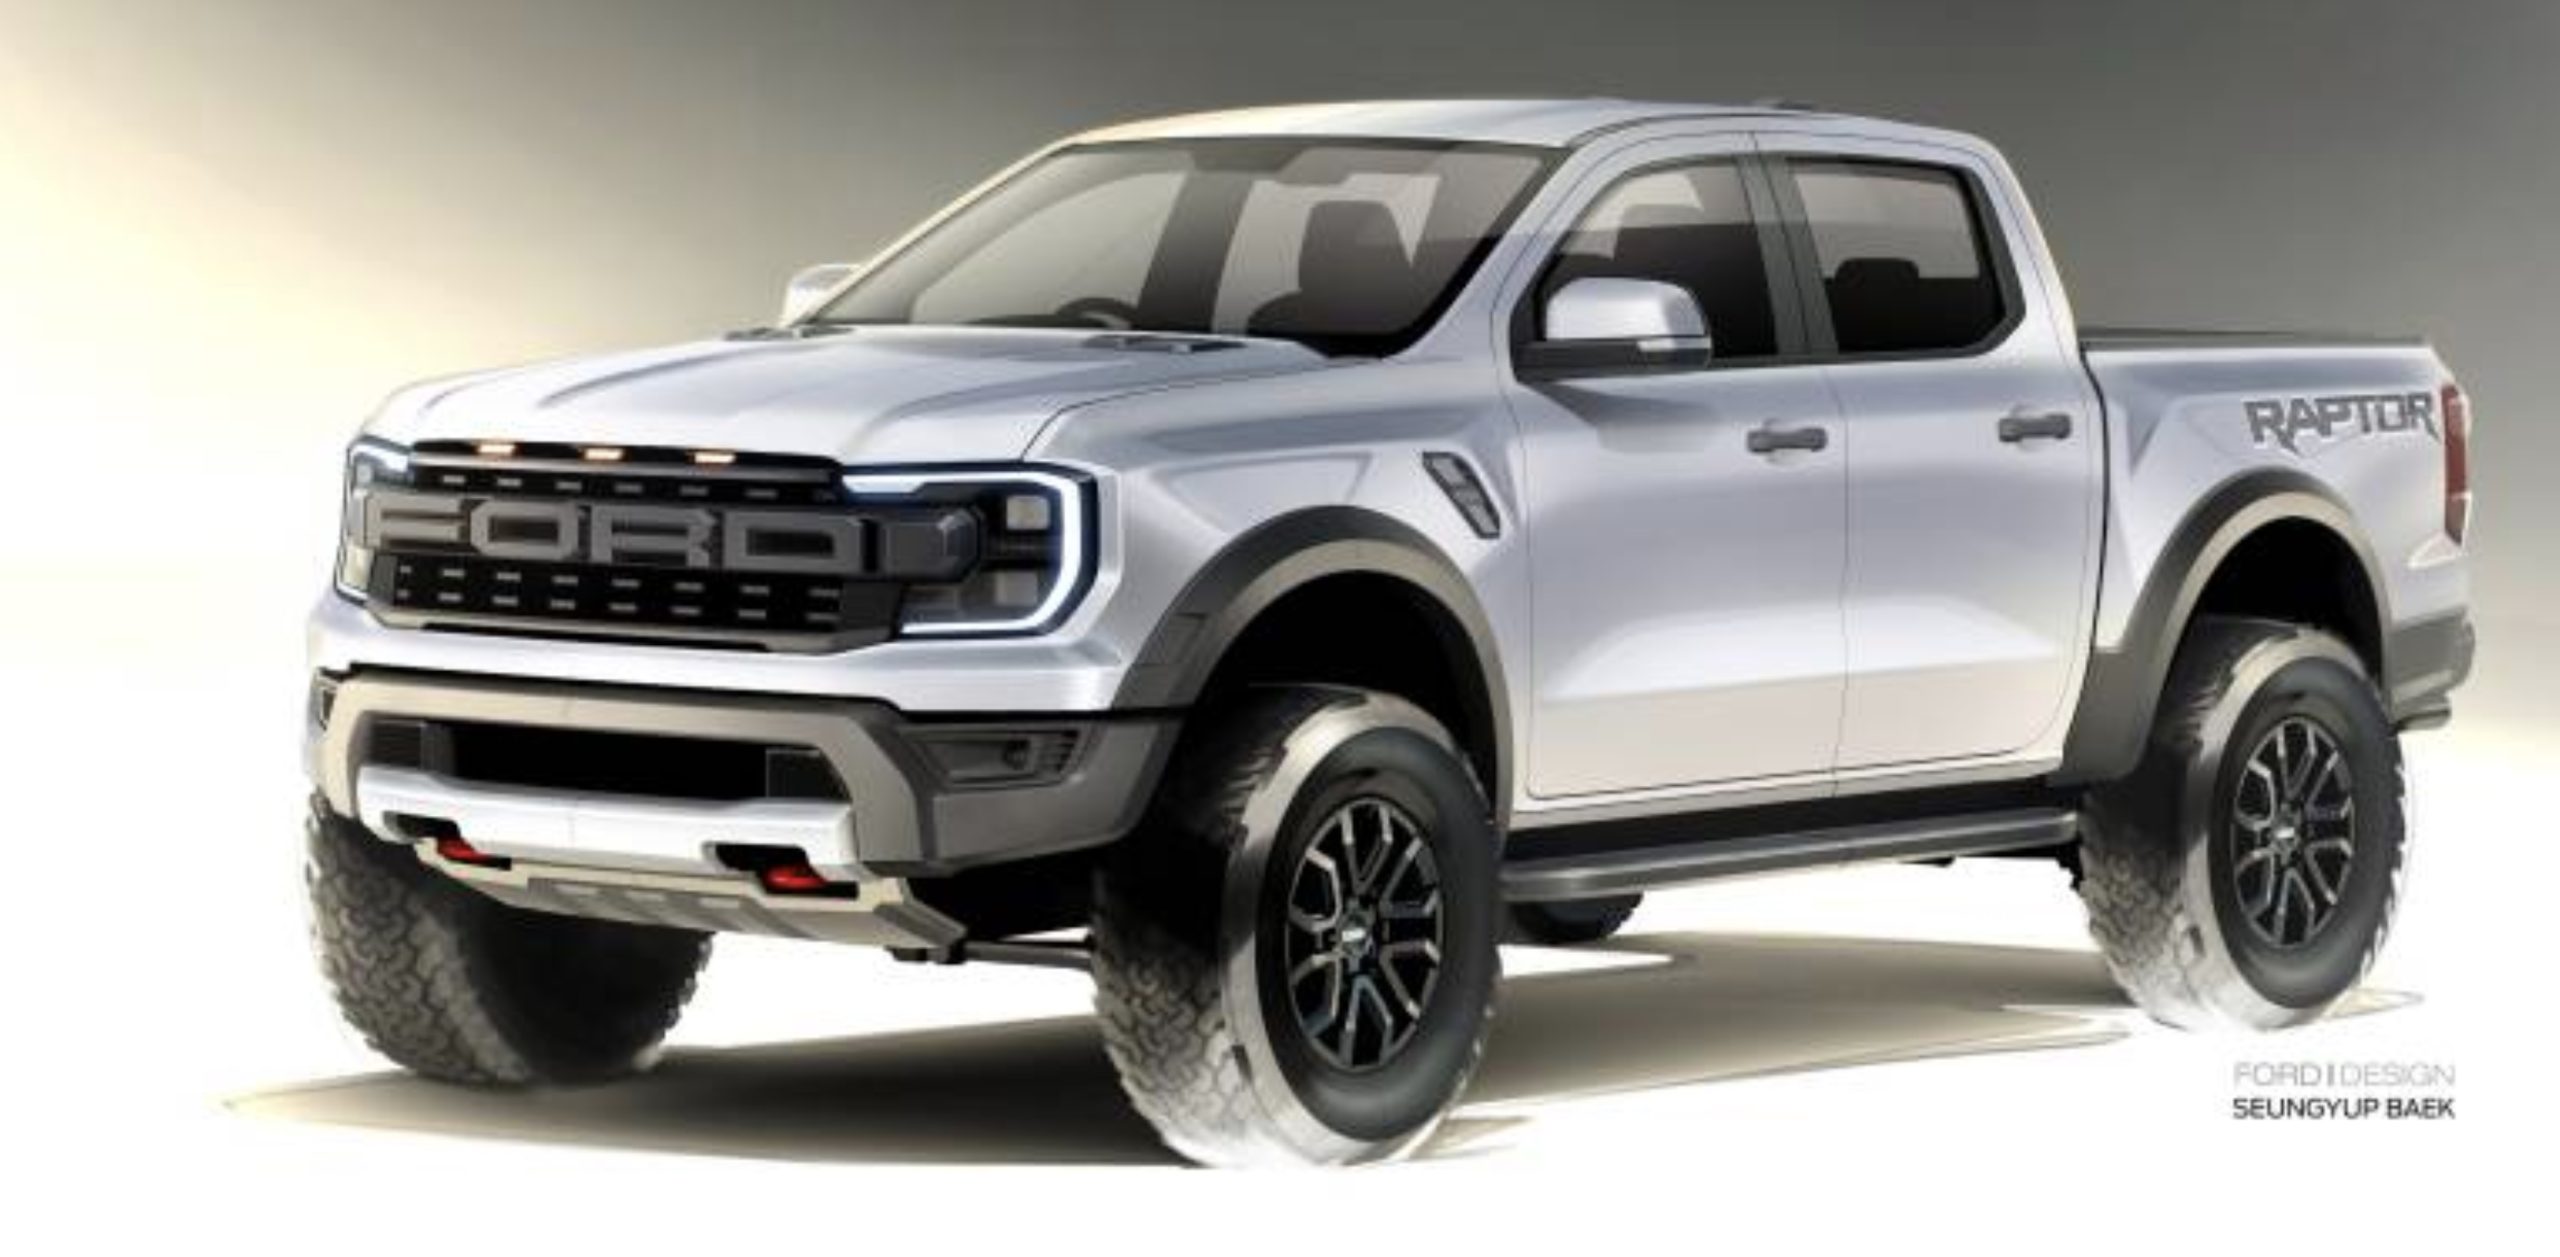 Design Brief: The All-New Ford Ranger